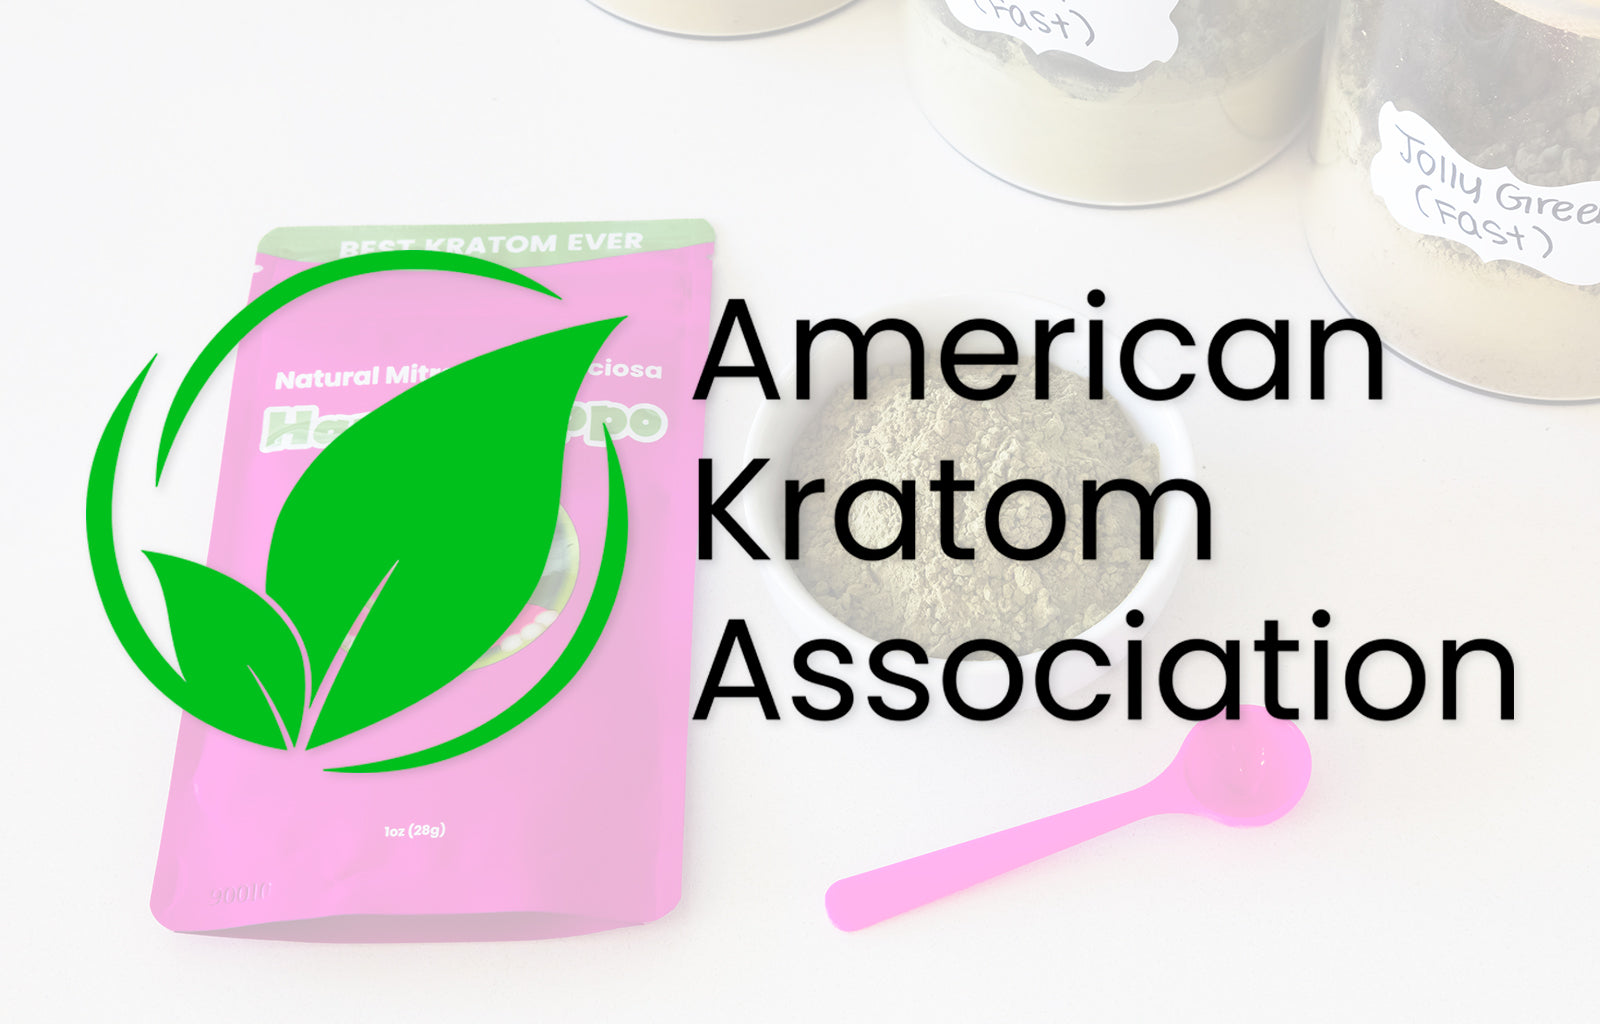 Featured image depicting the logo of the American Kratom Association, behind which is a watermark image of Happy Hippo brand kratom powder (indicating that we stand behind the American Kratom Association (AKA)).